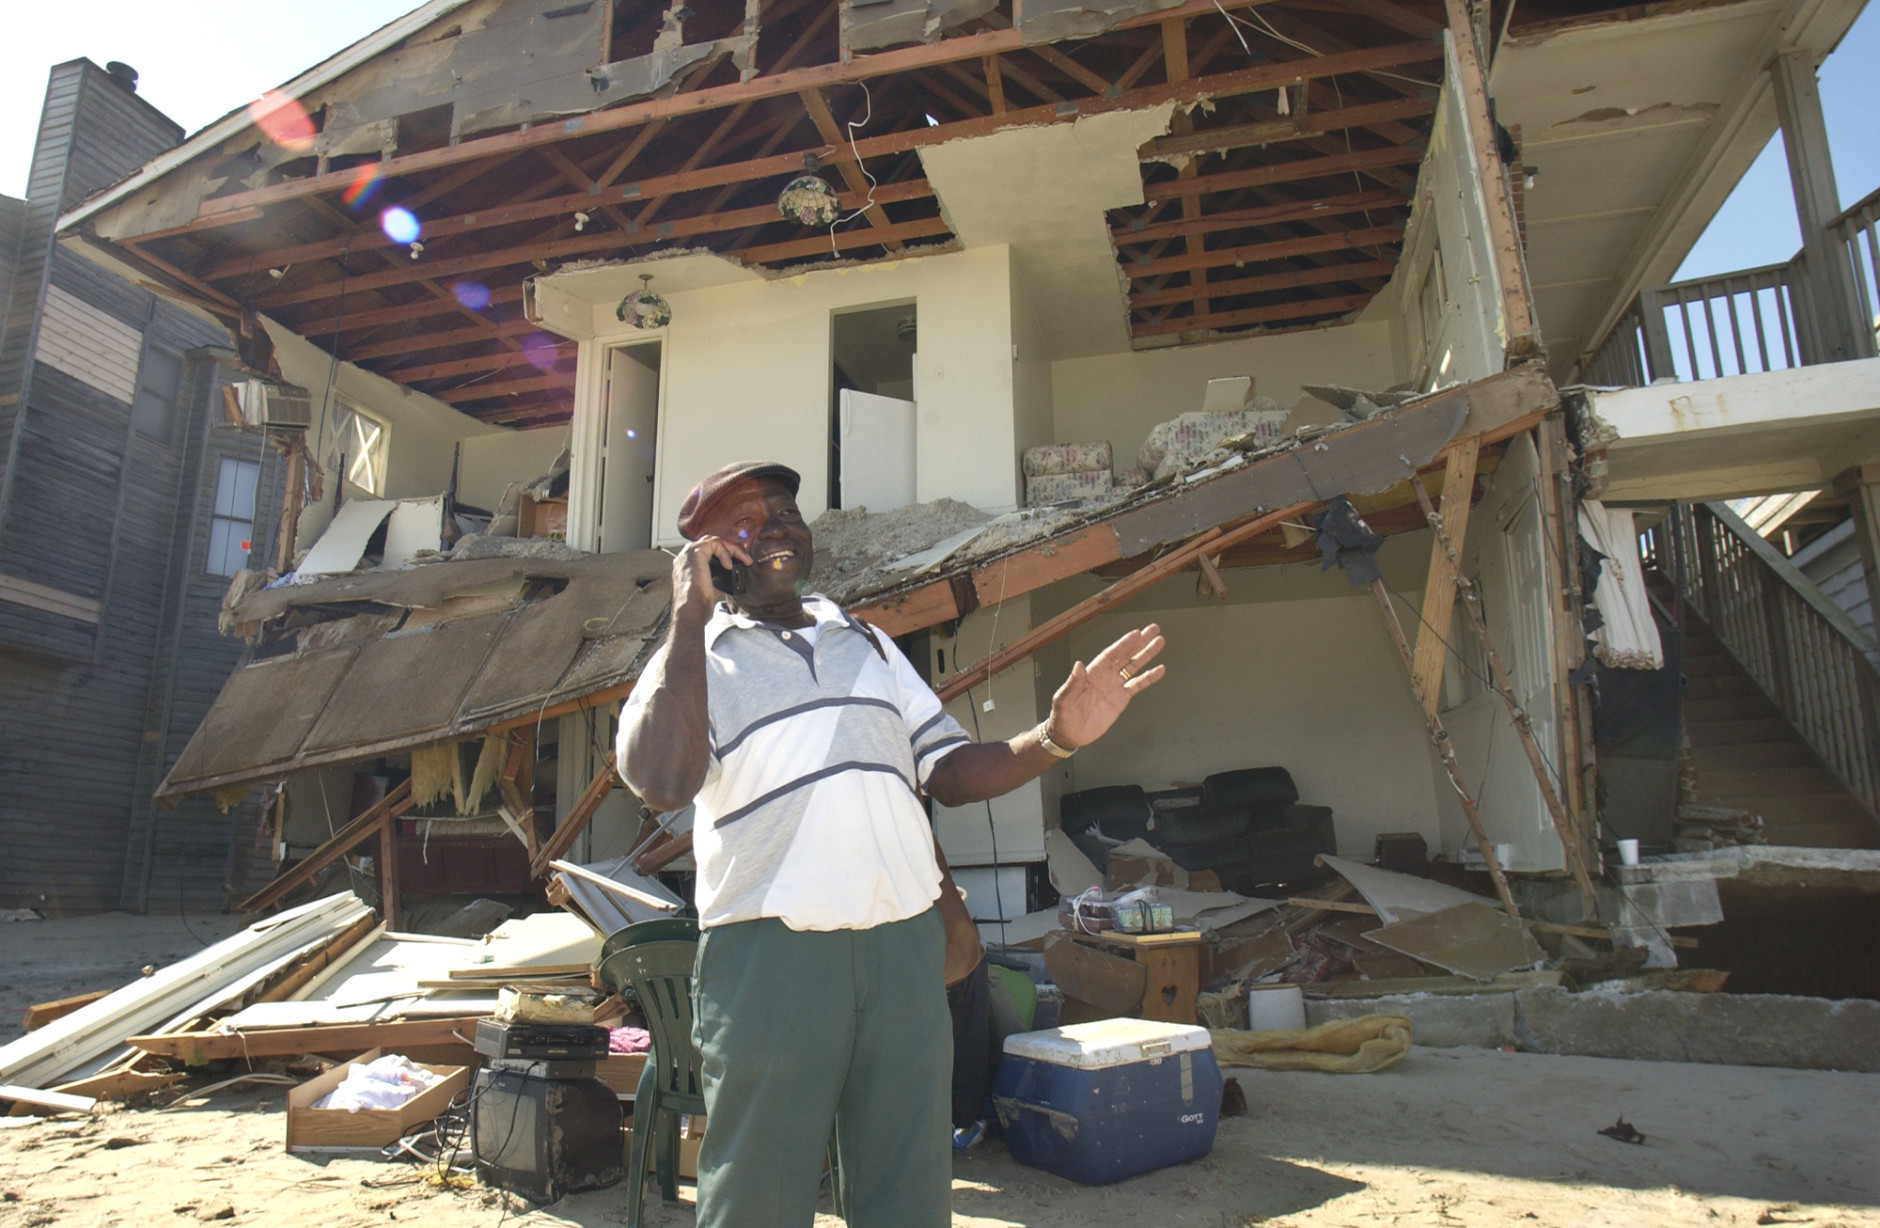 Levi Sabir, of Willoughby Spit, talks on a cellphone to a Red Cross official as he tries to recover belongings from his destroyed ground floor apartment in Norfolk, Va., Friday Sept. 19, 2003. Sabir and his wife were not in the apartment when Hurricane Isabel destroyed it.  The storm battered the area leaving over 3.5 million people without power.   (AP Photo/Steve Helber)